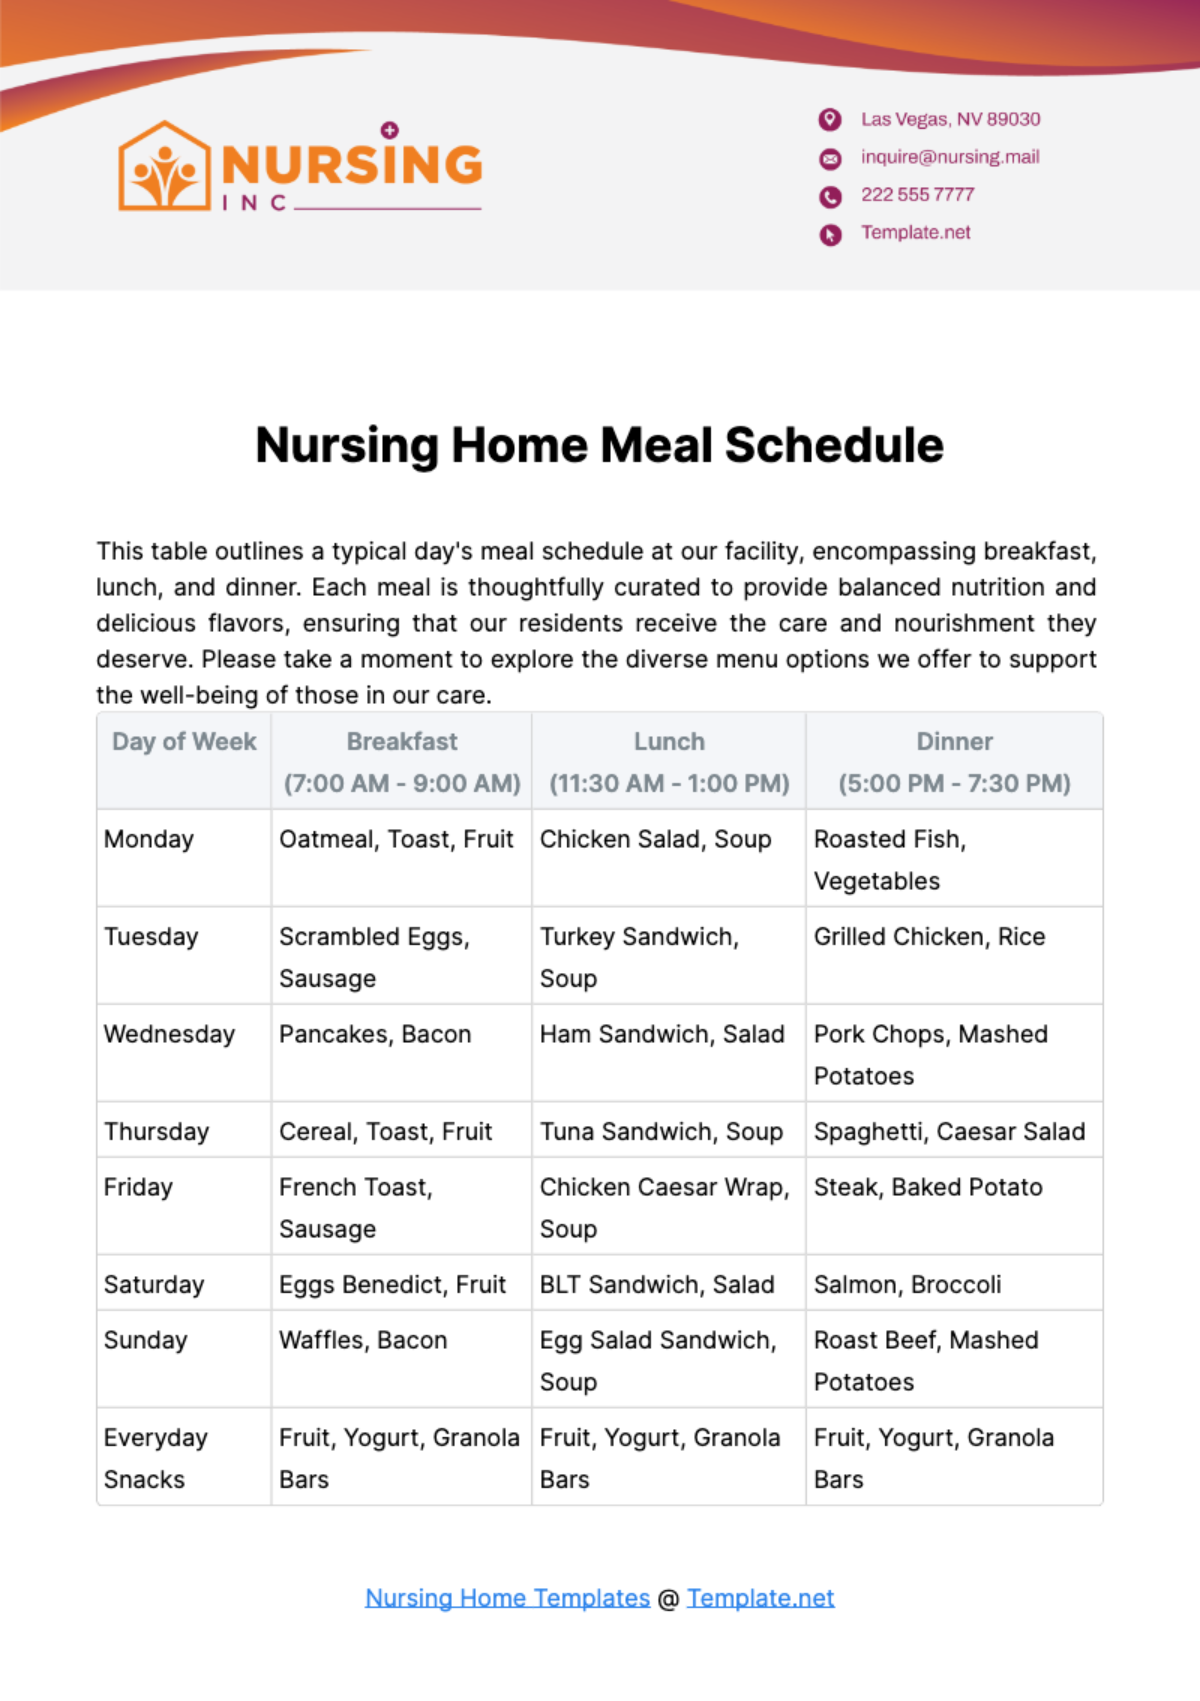 Nursing Home Meal Schedule Template